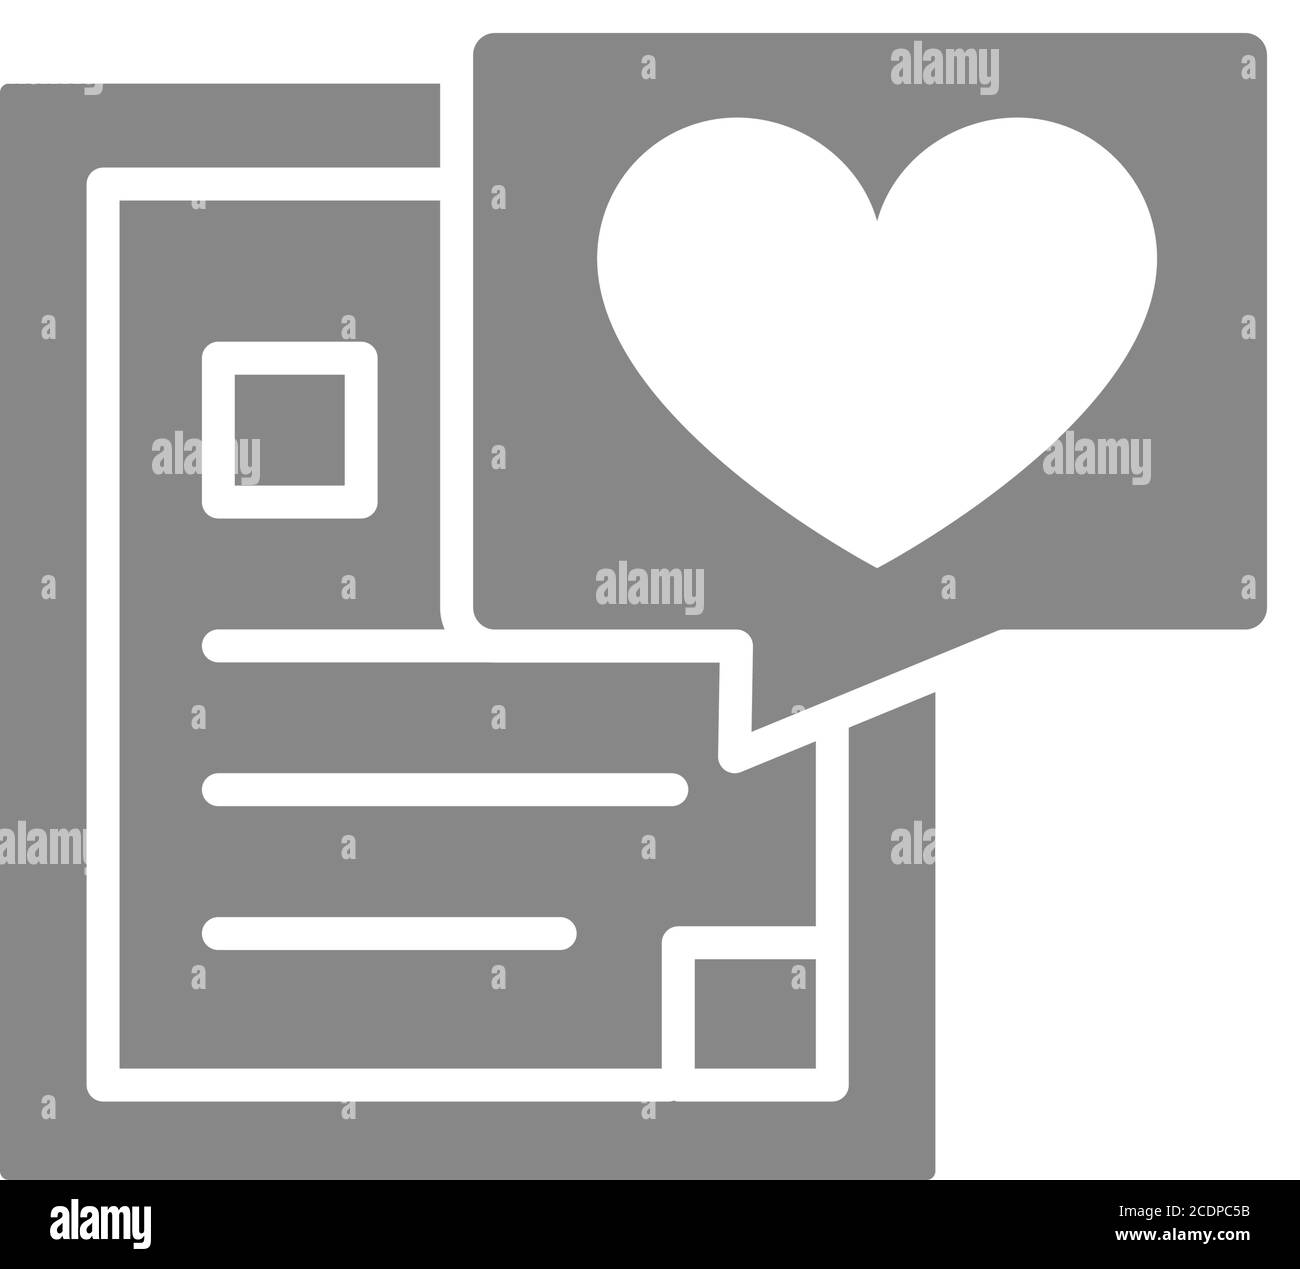 Document with heart grey icon. Donation form, chat bubble, help, charity, like, feedback symbol Stock Vector